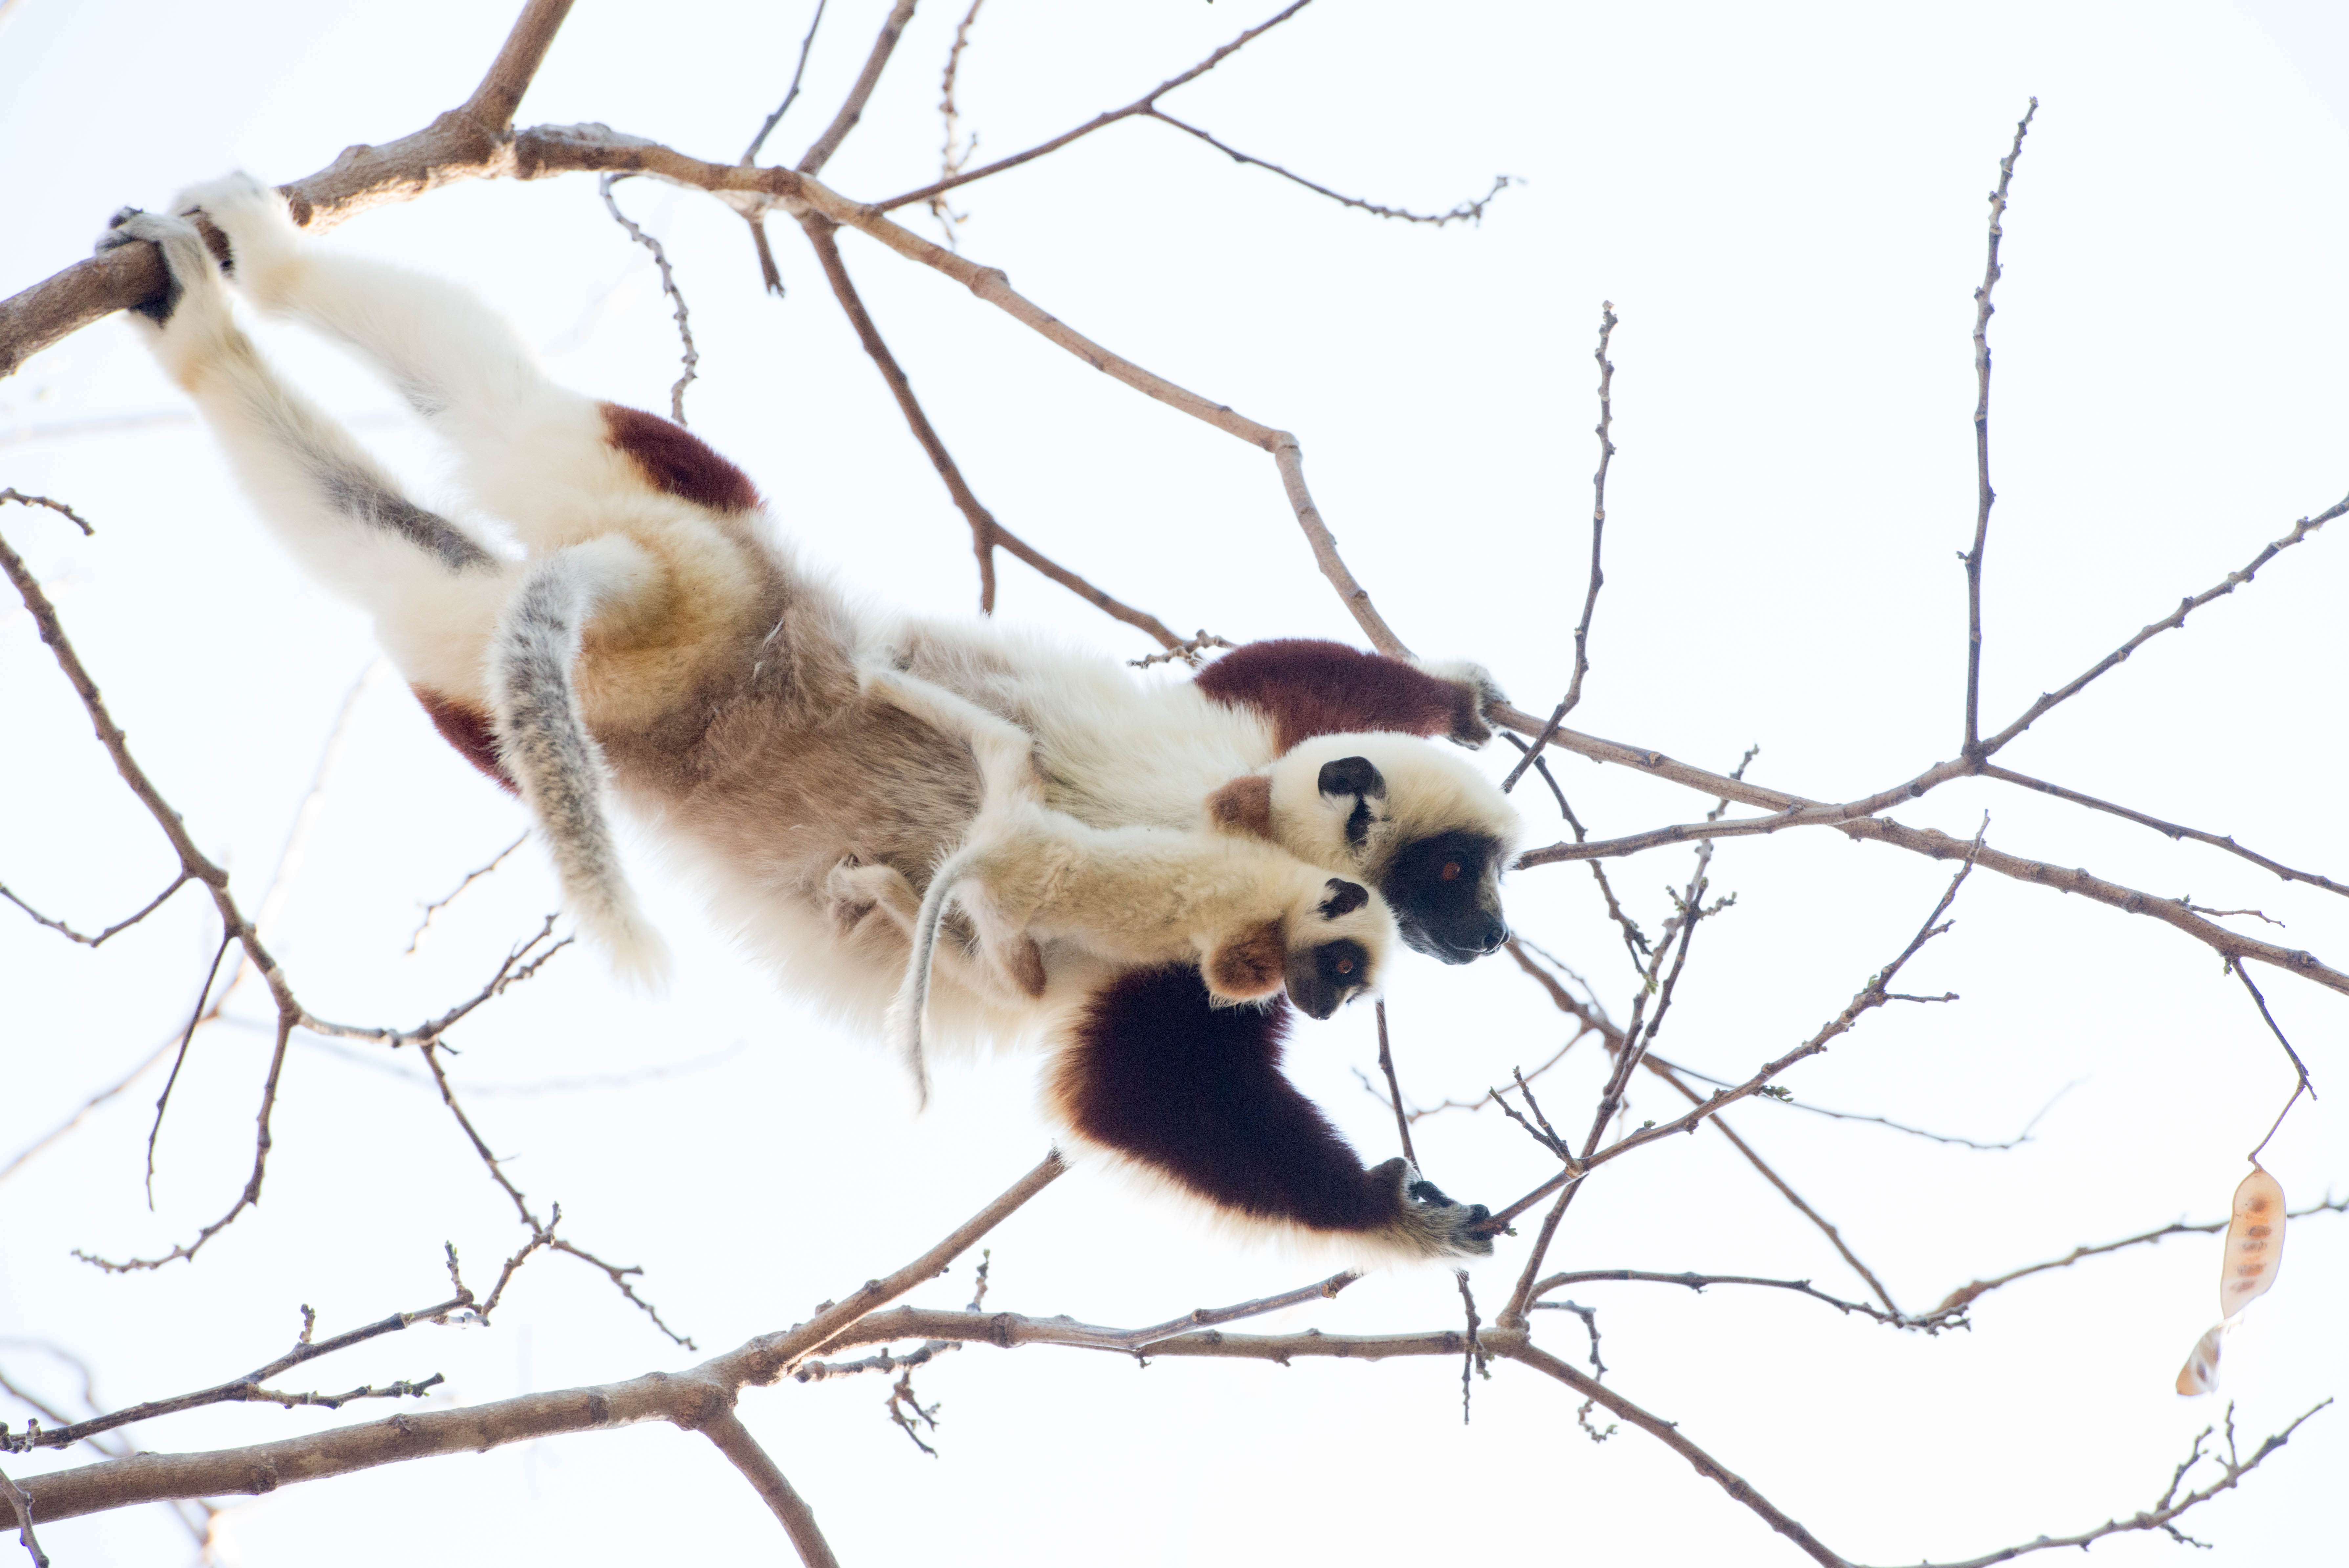  A Coquerel's sifaka mother teaches its infants to forage in the canopy. © WWF-US/Rachel Kramer